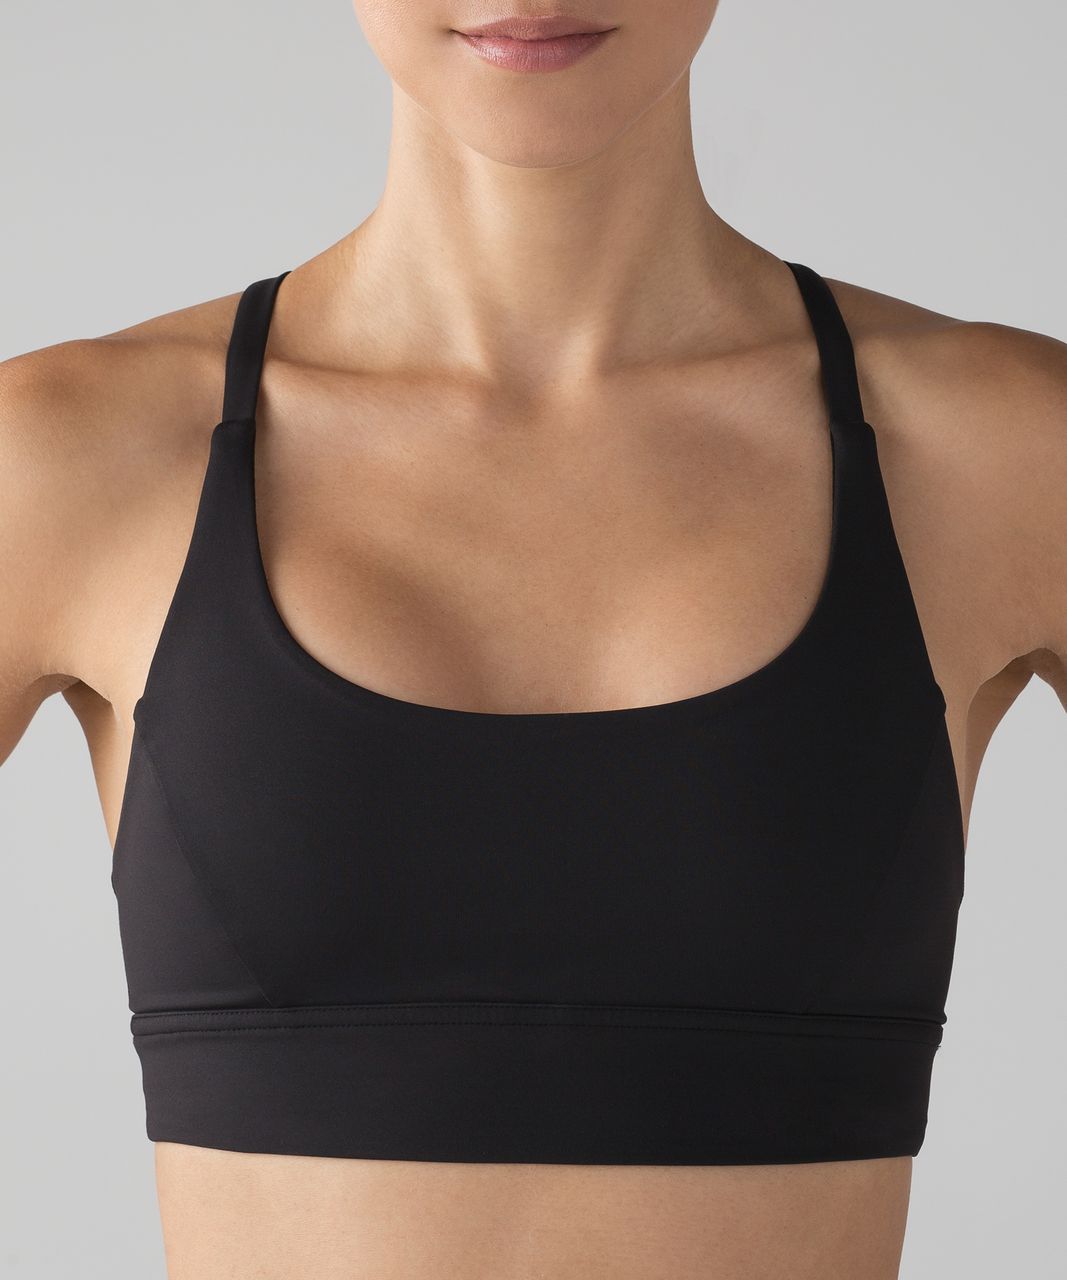 Lululemon Ribbed Train Bra Black Size XS - $48 (17% Off Retail) New With  Tags - From PrelovedbyJazi